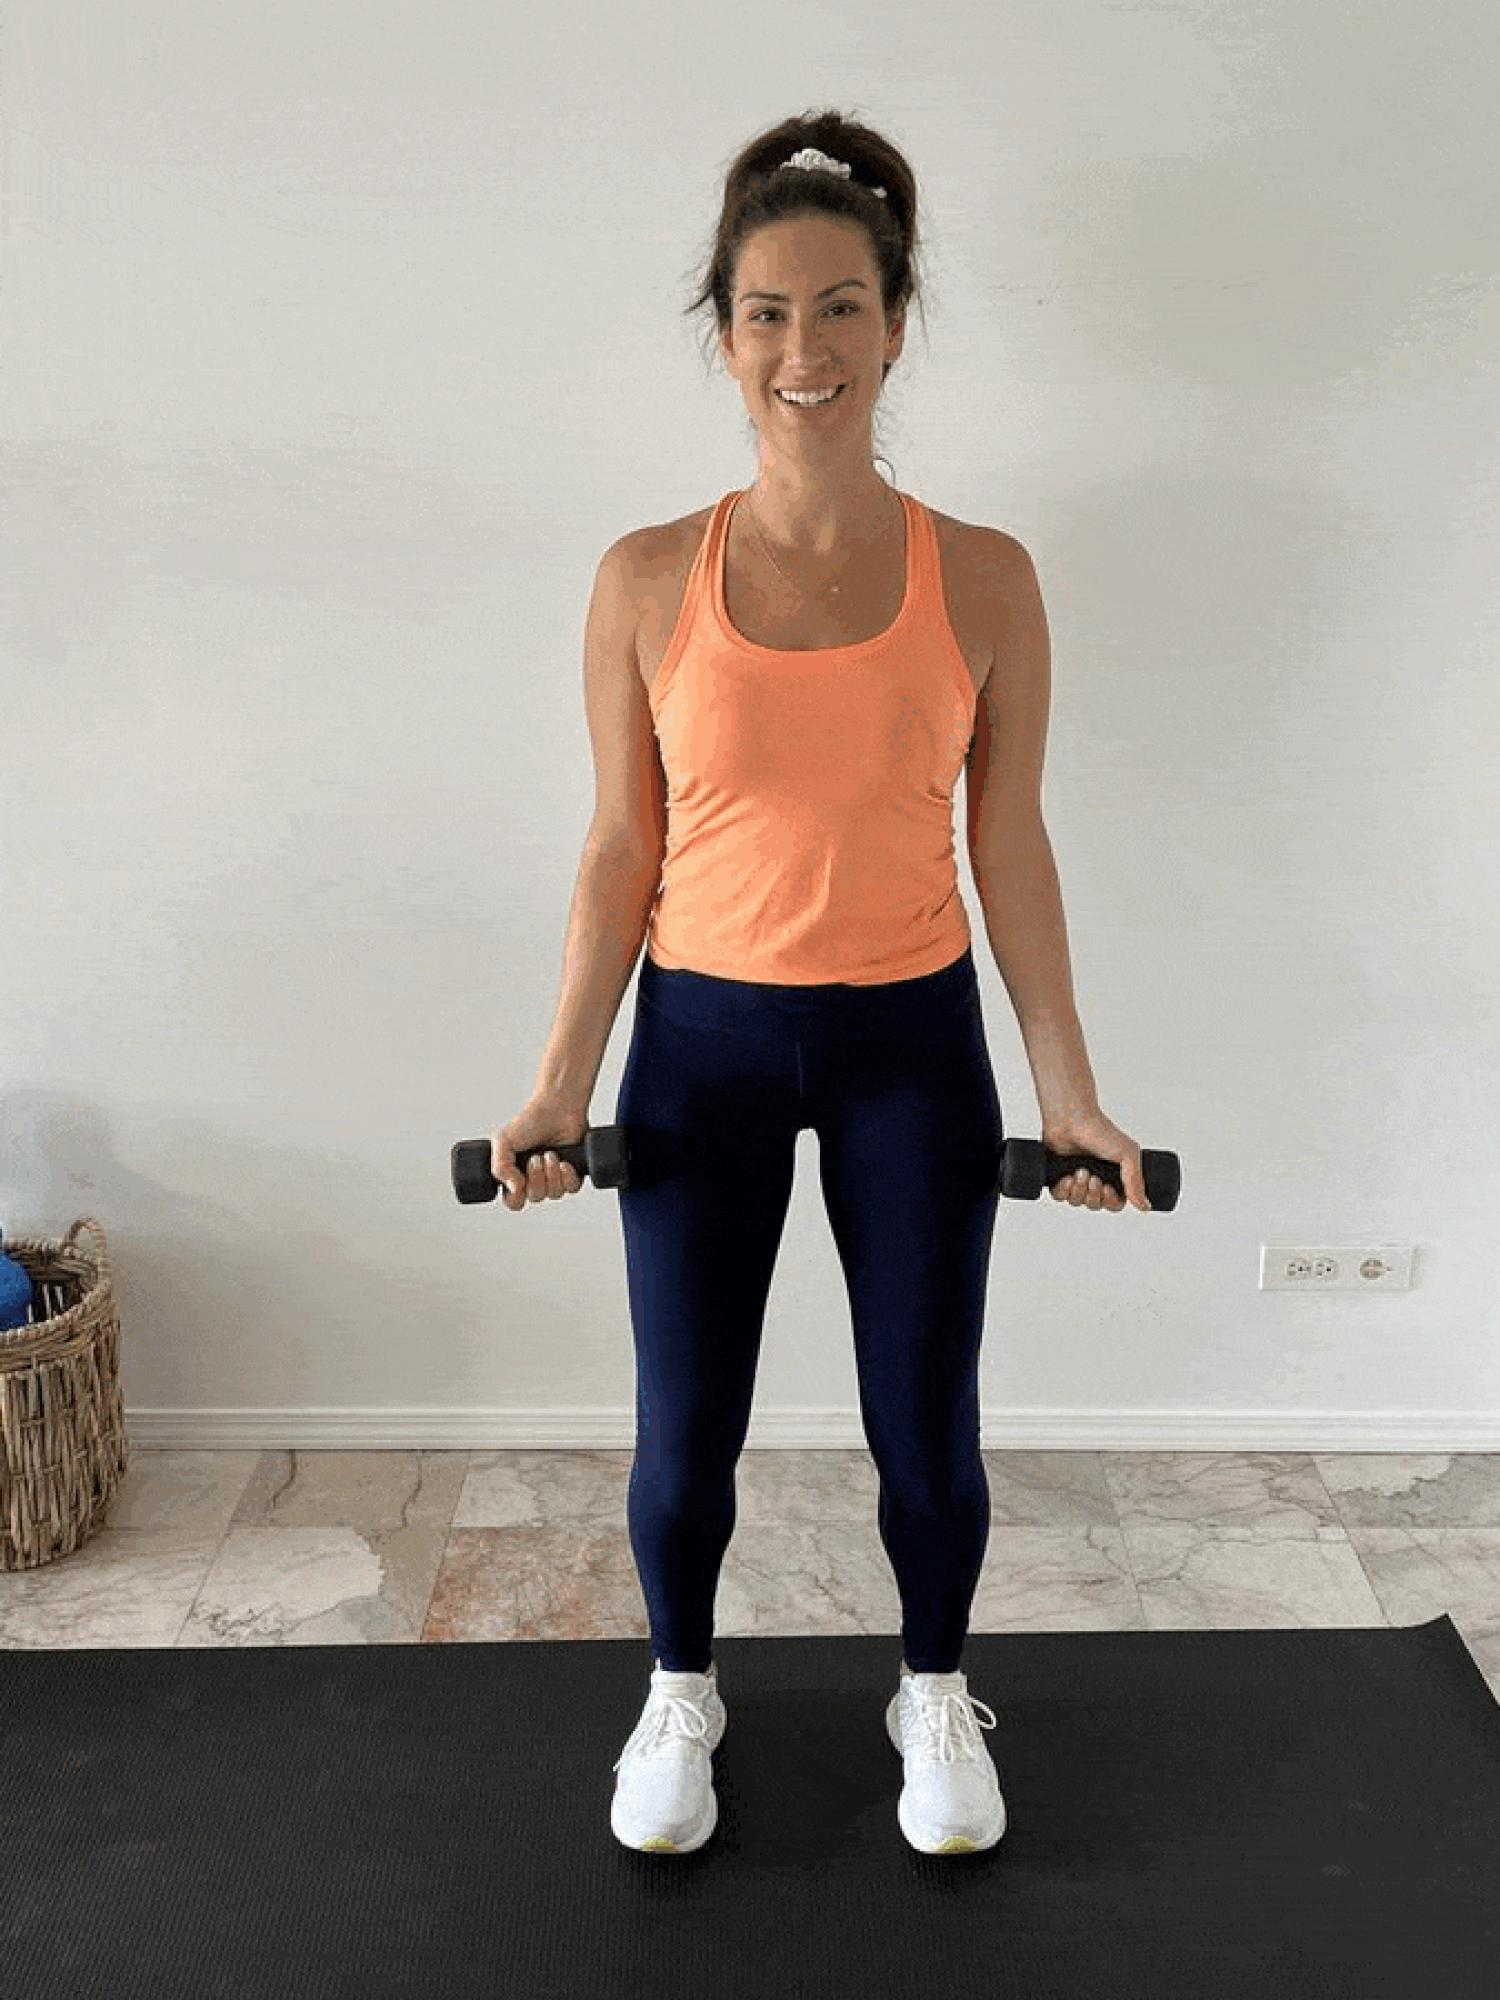 20 best arm exercises to tone your triceps, biceps and shoulders